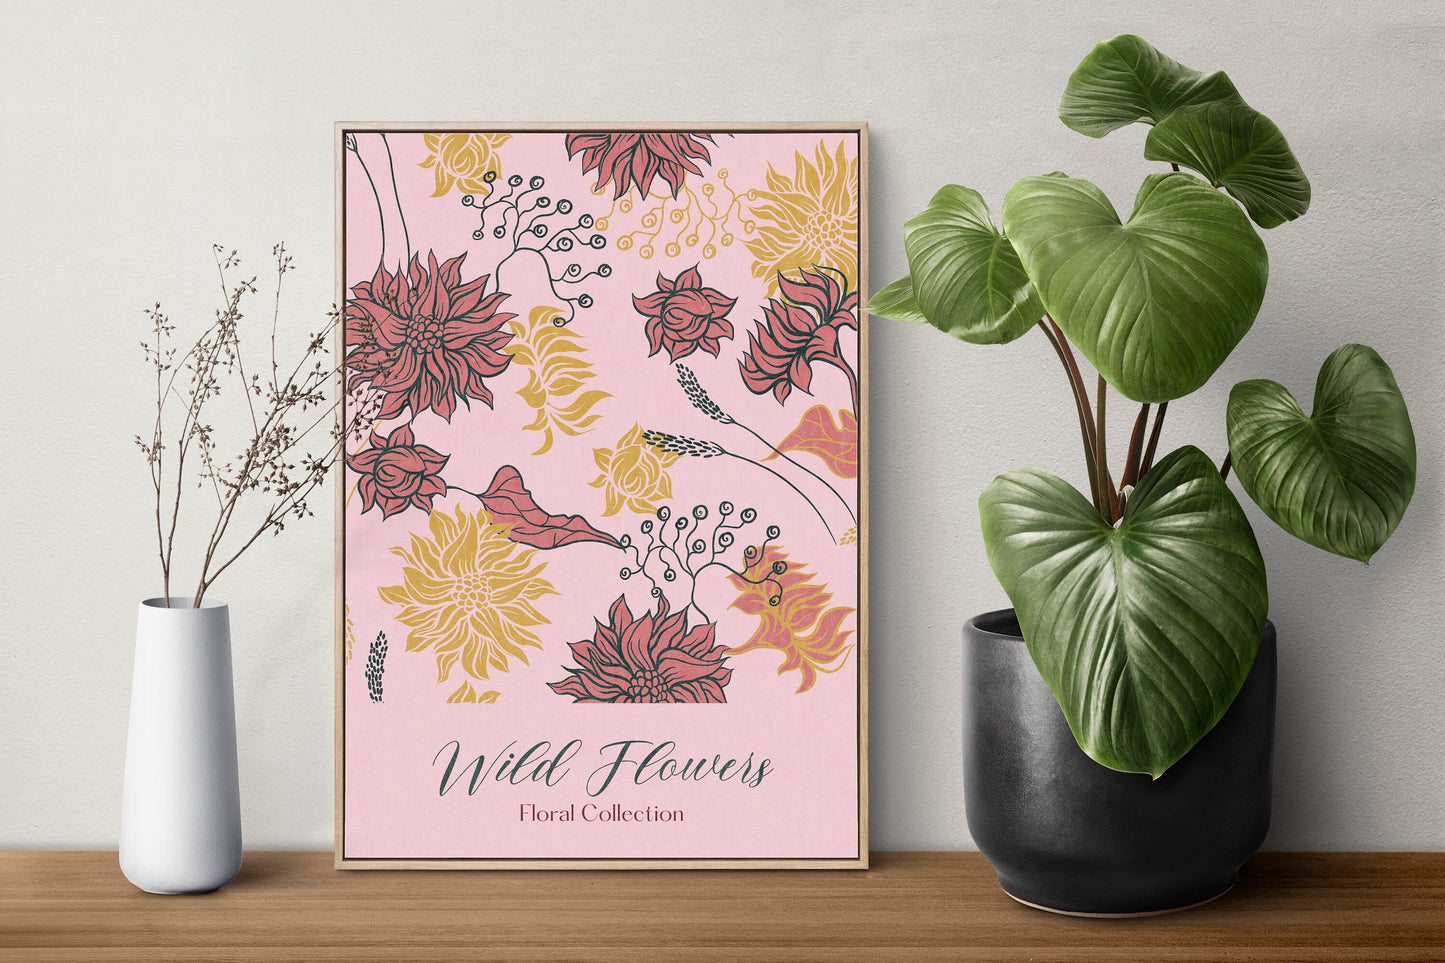 Floral Collection Flower Prints, Boho Home Decor, Wild Flowers Wall Art, Flower Prints, Living Room, A5/A4/A3/A2/A1, Different Colours,